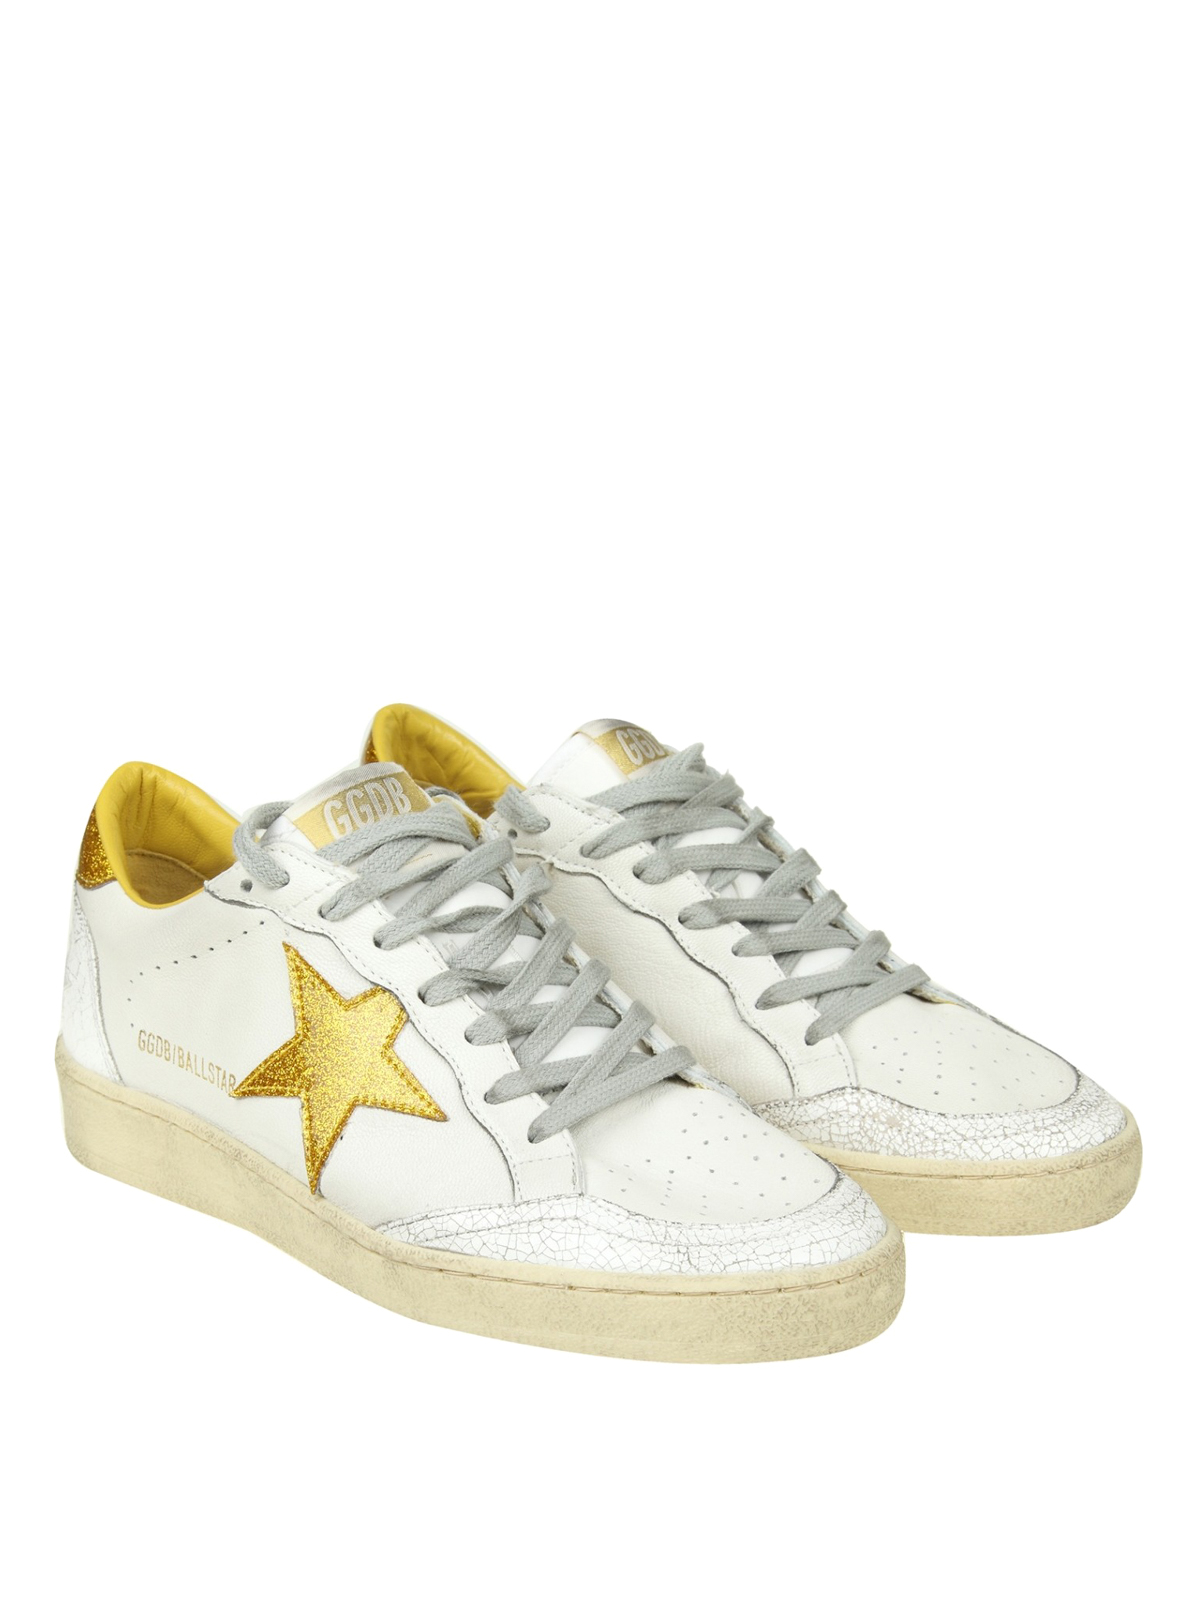 Trainers Golden Goose - Ball Star gold glitter detail sneakers - G33WS592H5